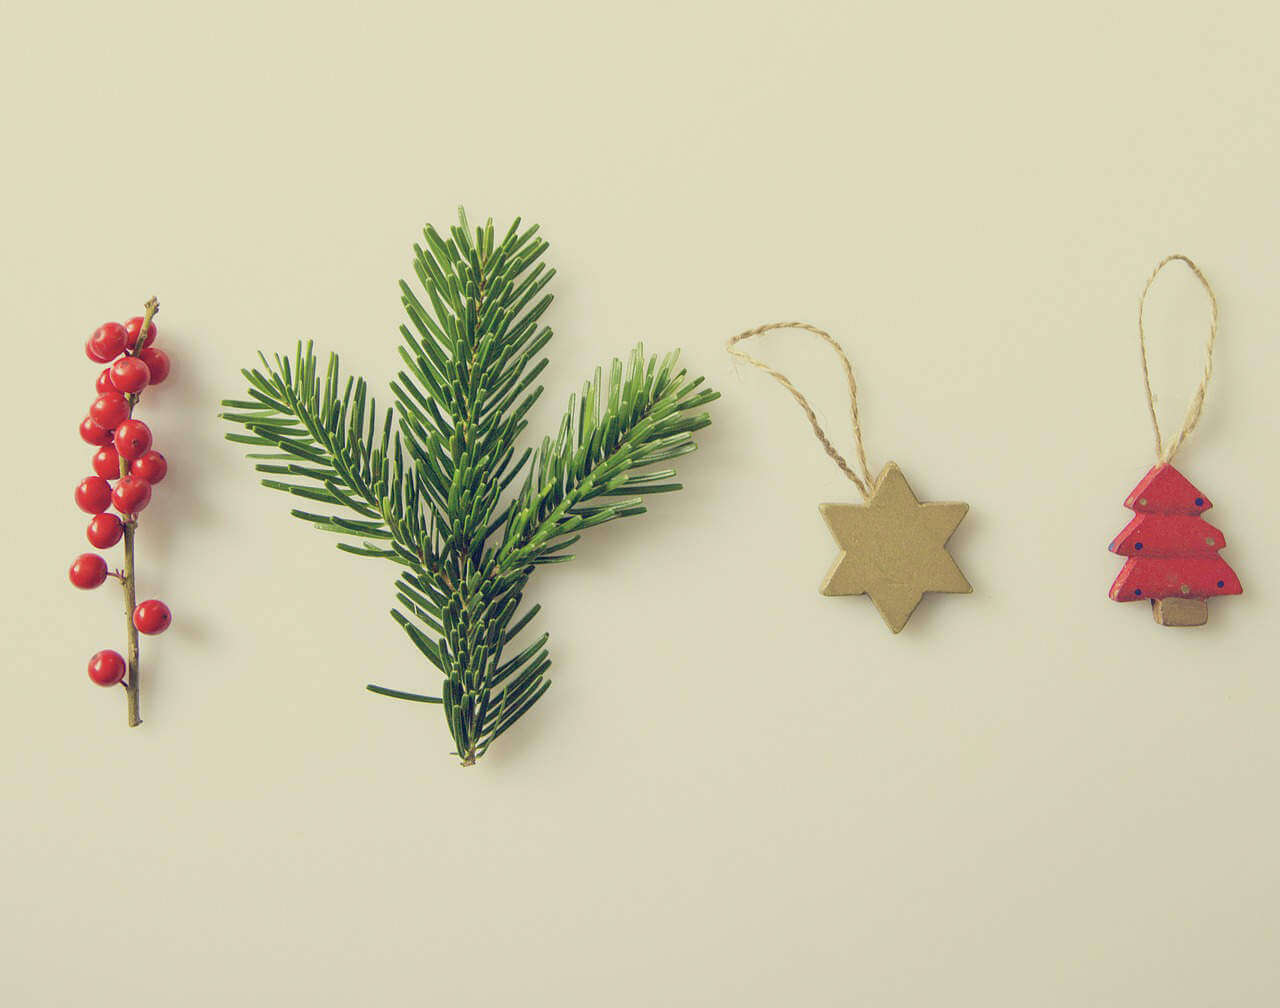 Incorporate Trends into Your Holiday Marketing Plan